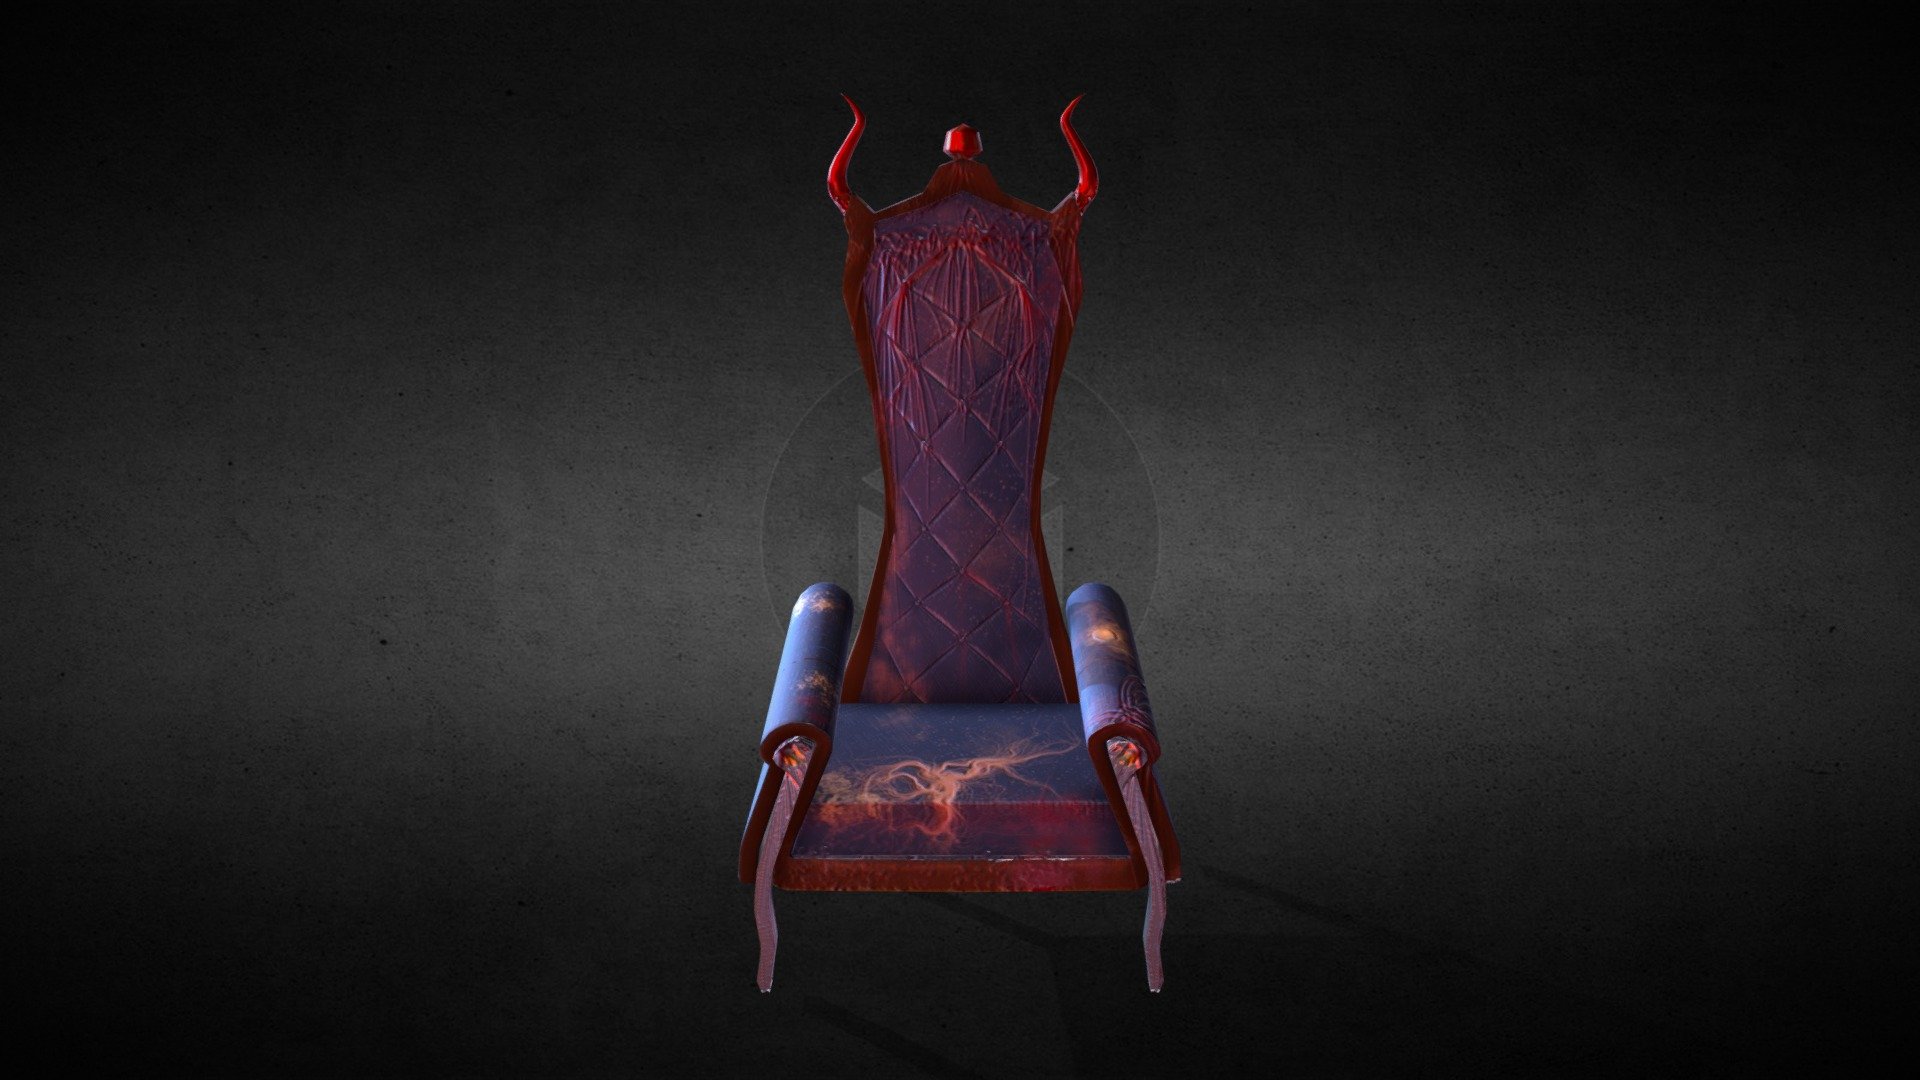 The wicked throne of the evil ghost 
designed,modeled&amp;textured by me
modeled by 3D Max 
textured by Subtance painter - The Wicked Throne - 3D model by Aya.Ibrahim.ElSaftawi 3d model